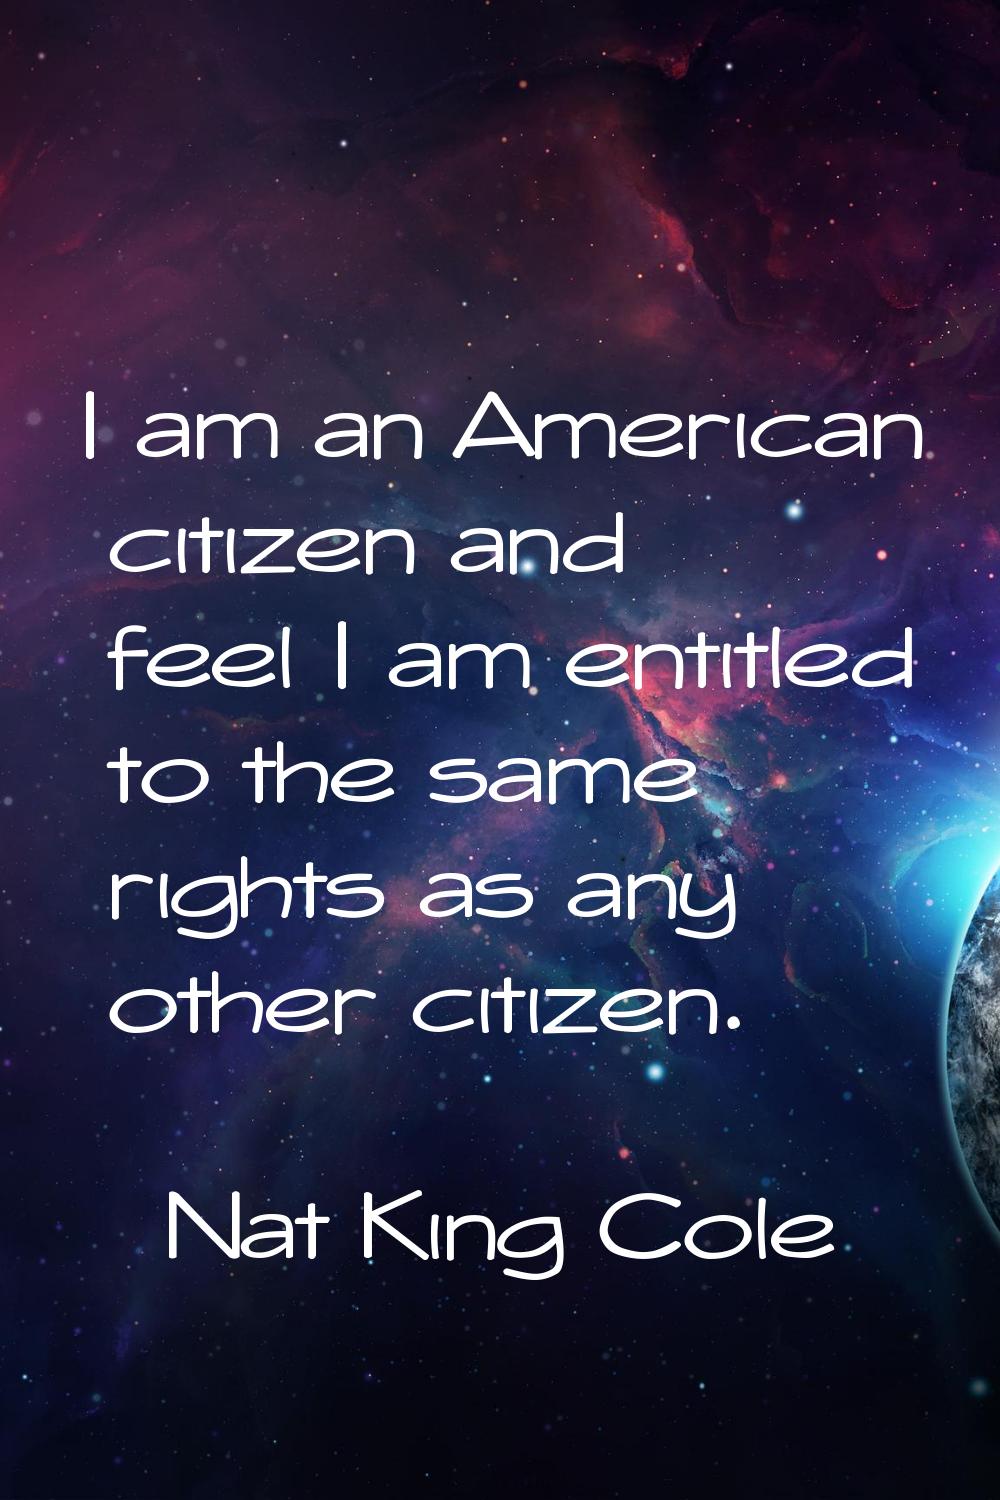 I am an American citizen and feel I am entitled to the same rights as any other citizen.